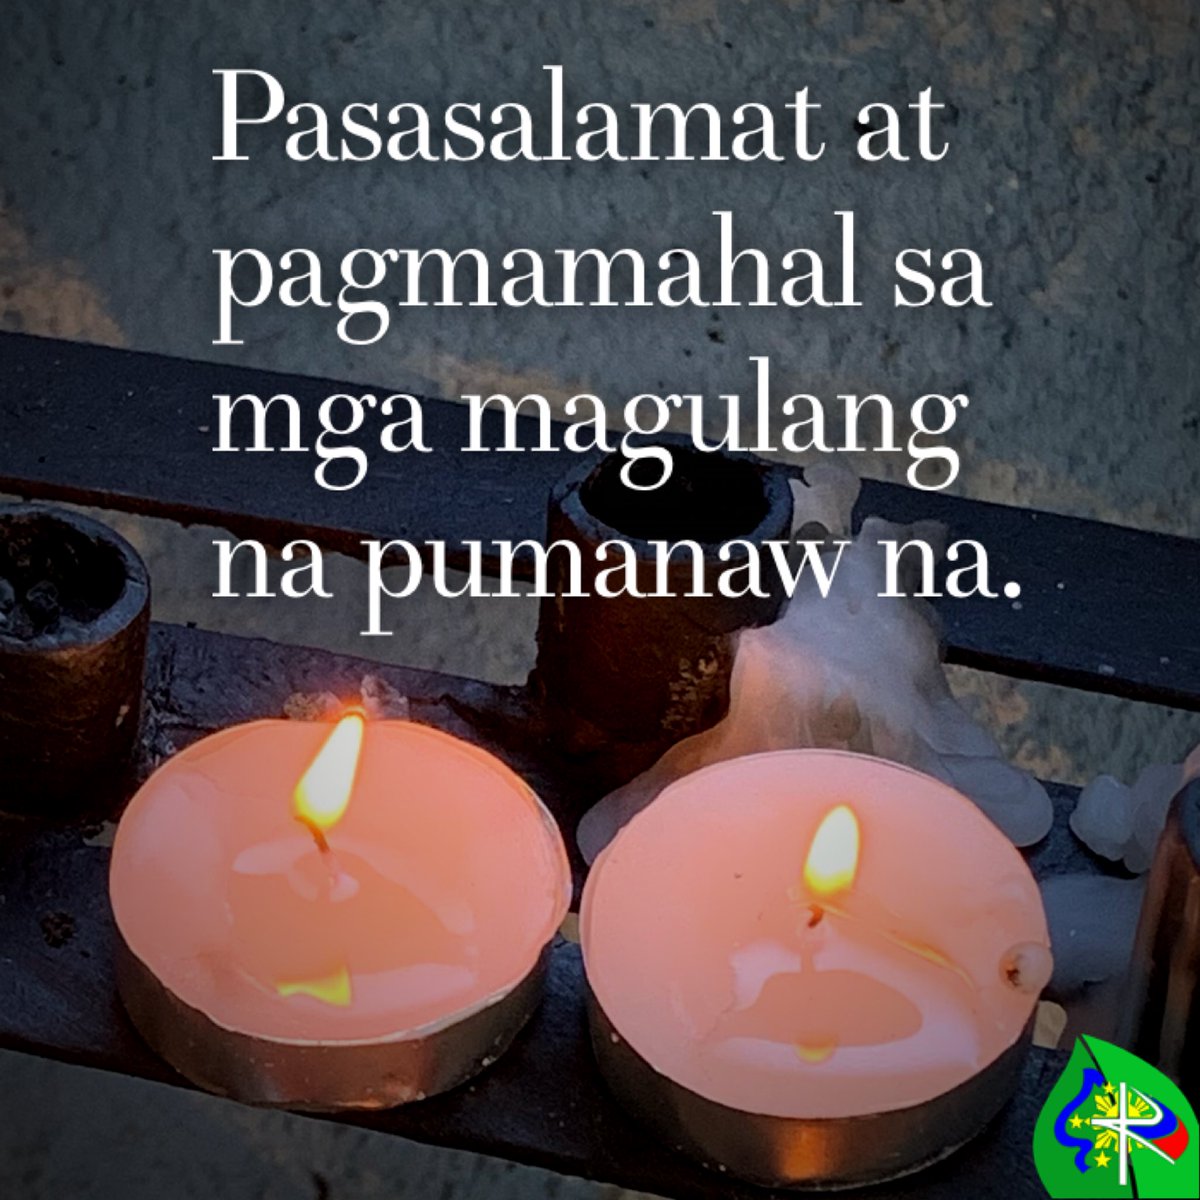 A BLESSED ALL SOULS’ DAY! 🙏 Today, November 2, we commemorate All the Faithful Departed. #Undas2022